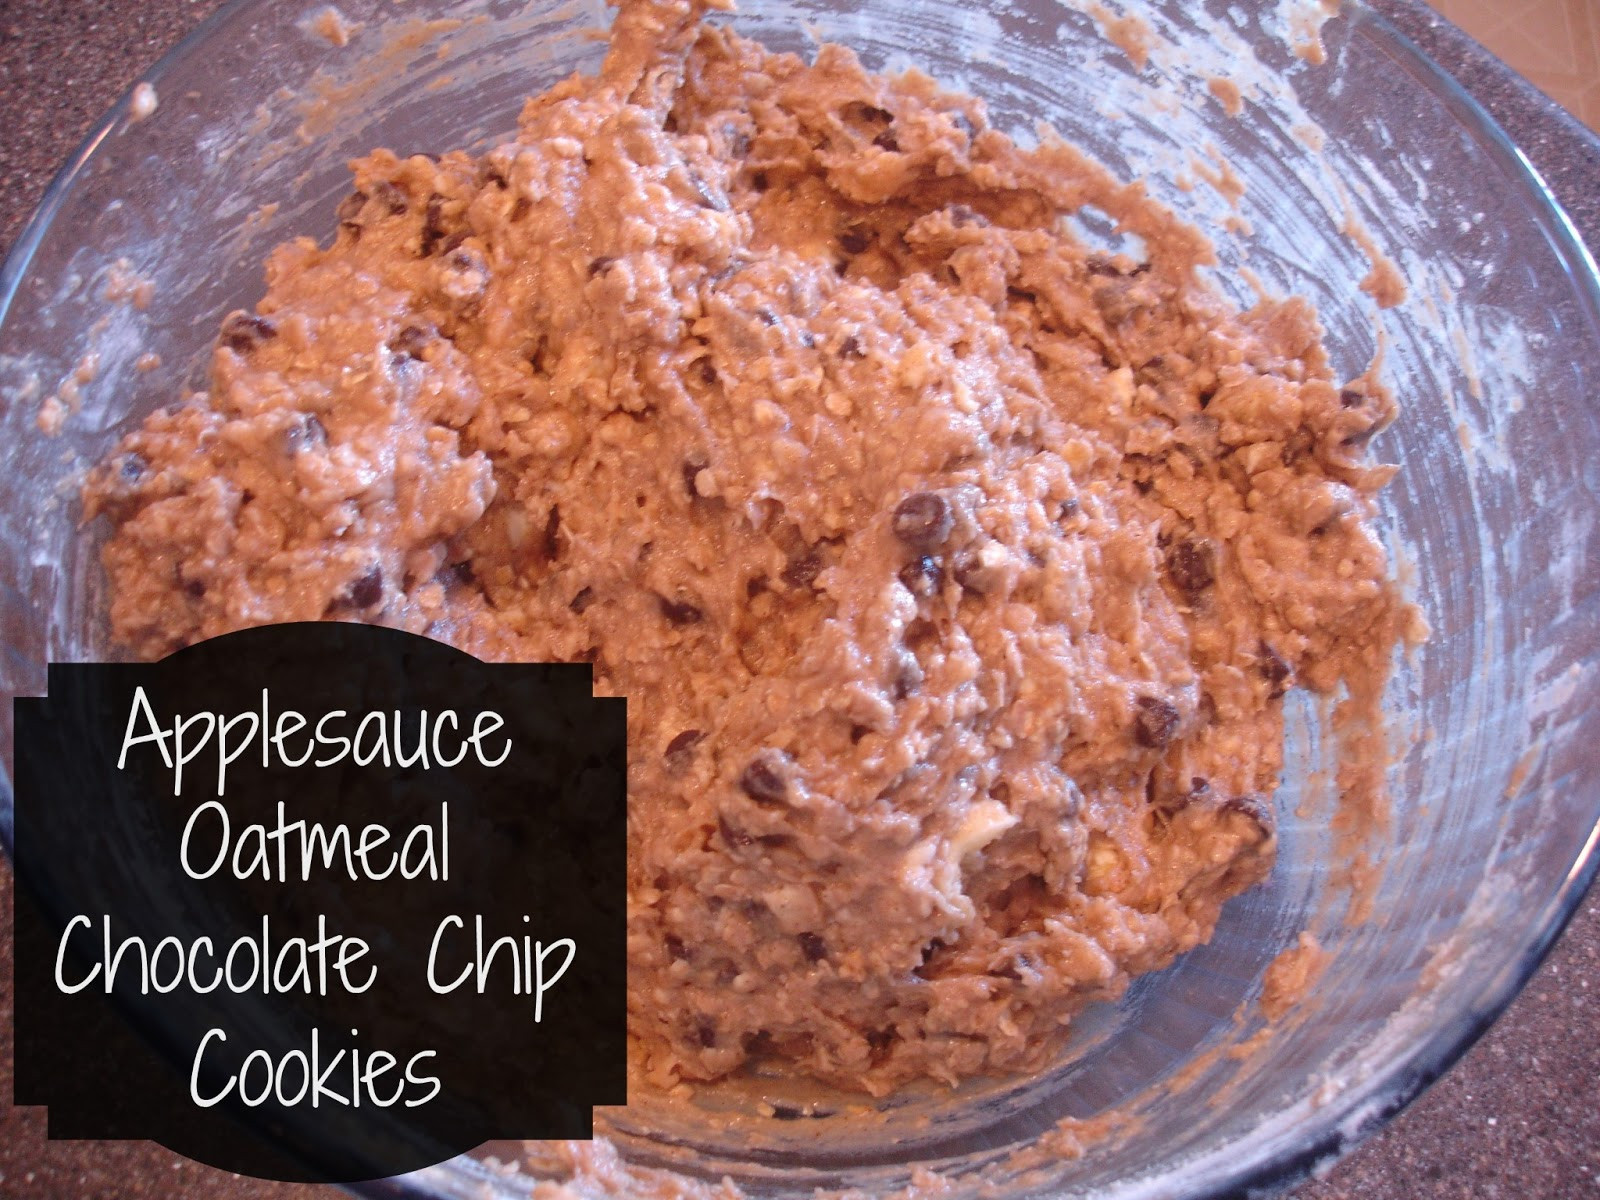 Healthy Chocolate Chip Cookies With Applesauce
 Alex Haralson Applesauce Oatmeal Chocolate Chip Cookies